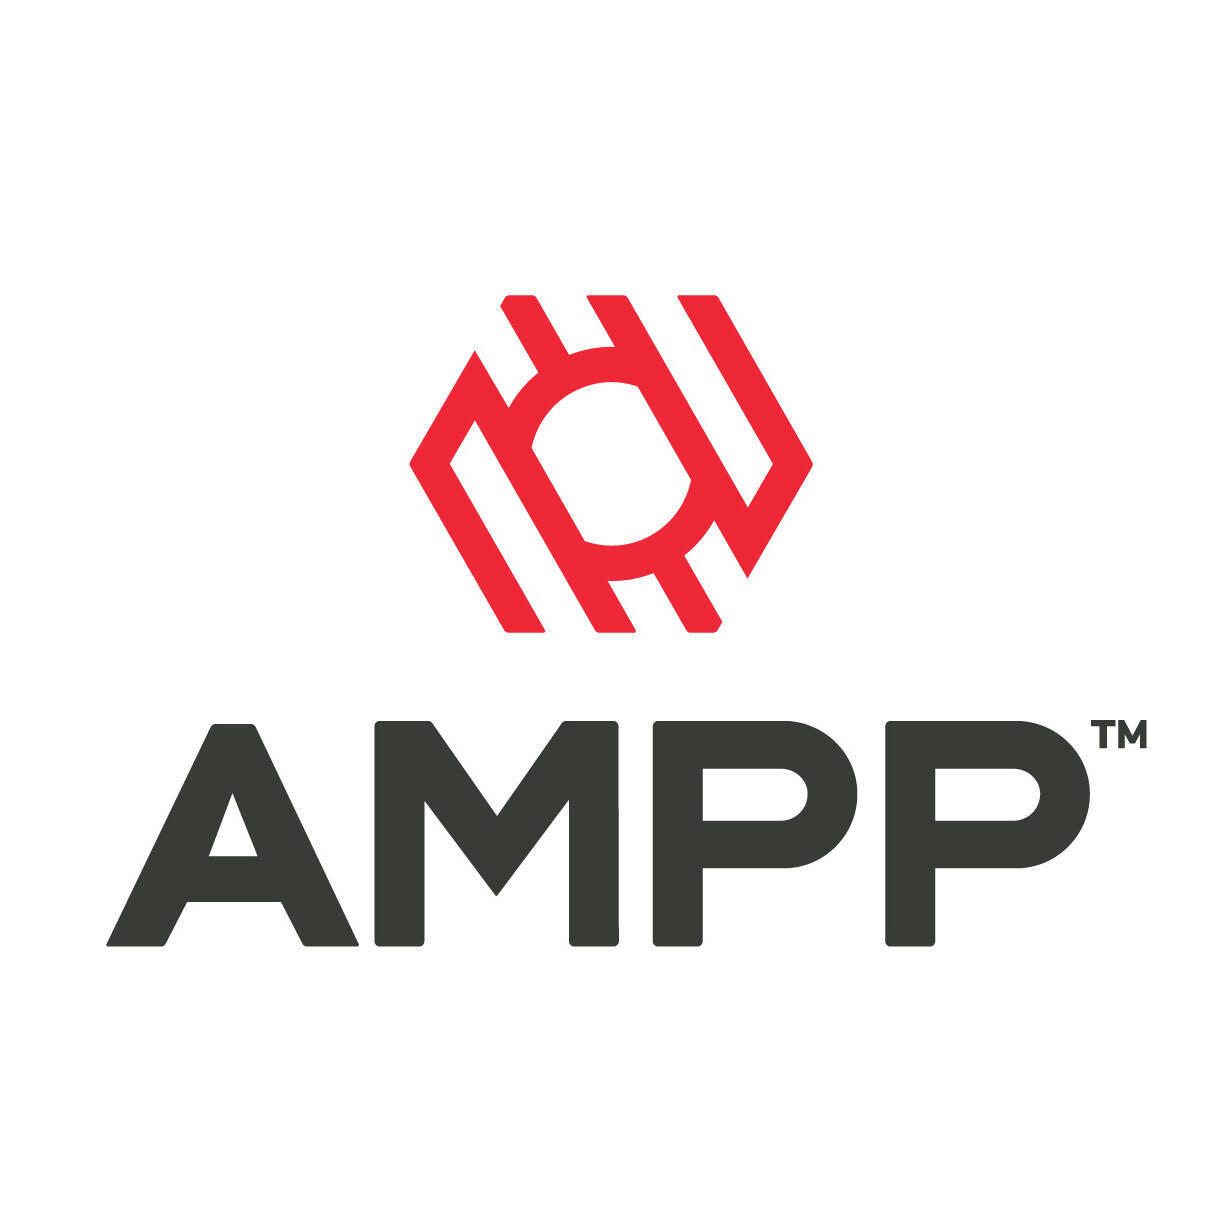 Association for Materials Protection and Performance (AMPP)